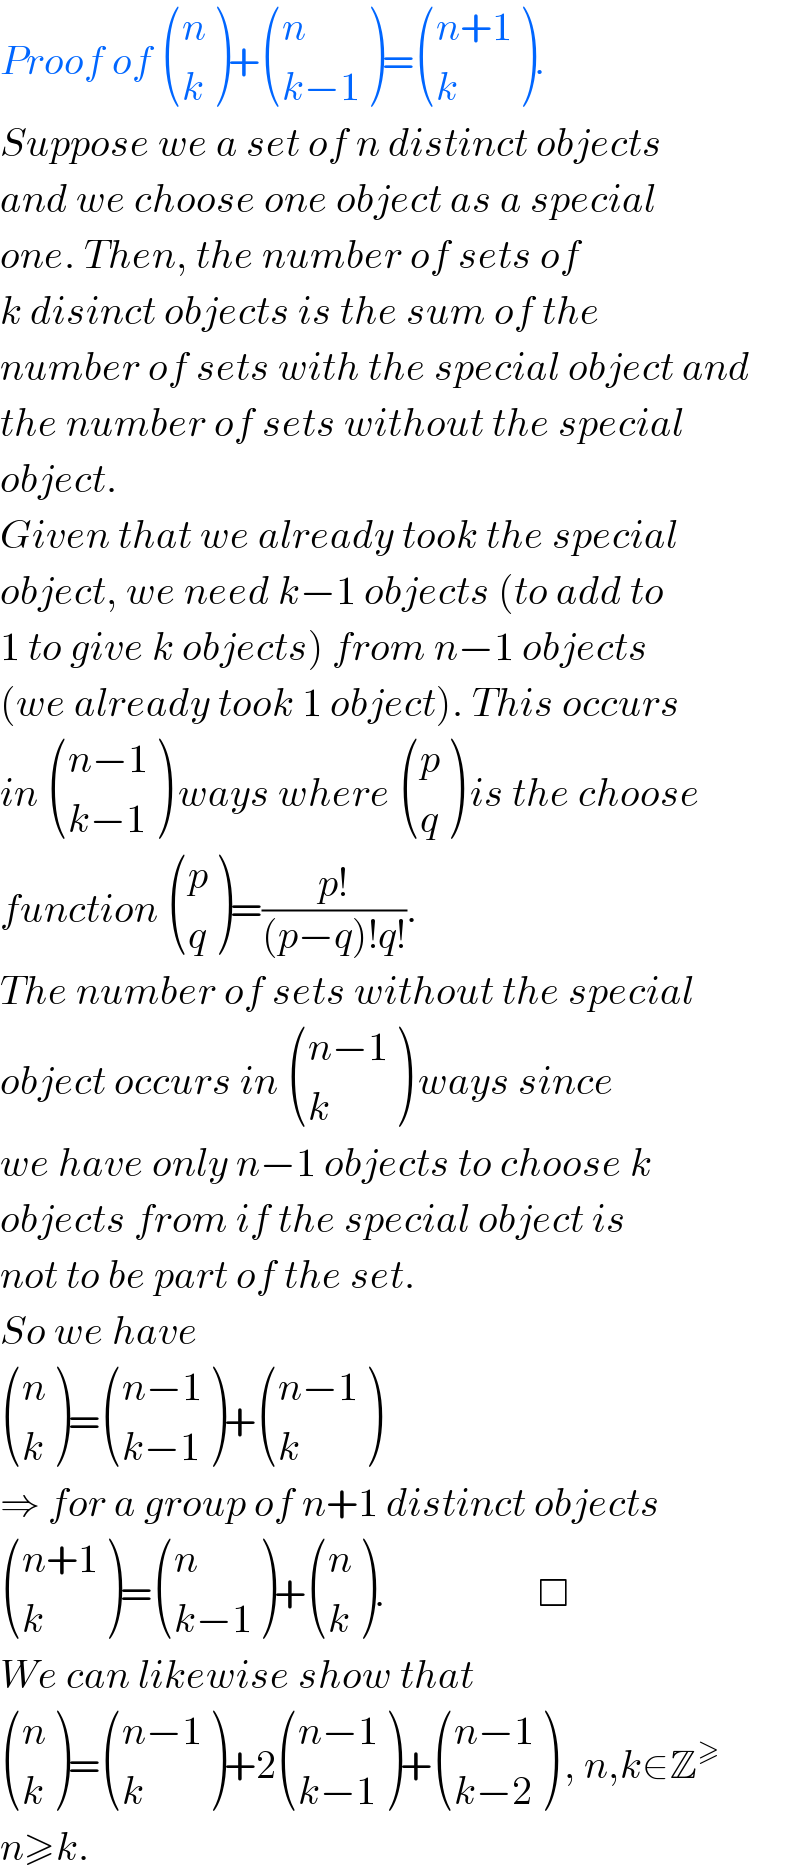 Proof of  ((n),(k) )+ ((n),((k−1)) )= (((n+1)),(k) ).  Suppose we a set of n distinct objects  and we choose one object as a special   one. Then, the number of sets of  k disinct objects is the sum of the   number of sets with the special object and   the number of sets without the special  object.   Given that we already took the special  object, we need k−1 objects (to add to  1 to give k objects) from n−1 objects  (we already took 1 object). This occurs  in  (((n−1)),((k−1)) ) ways where  ((p),(q) ) is the choose  function  ((p),(q) )=((p!)/((p−q)!q!)).  The number of sets without the special  object occurs in  (((n−1)),(k) ) ways since  we have only n−1 objects to choose k  objects from if the special object is  not to be part of the set.  So we have    ((n),(k) )= (((n−1)),((k−1)) )+ (((n−1)),(k) )  ⇒ for a group of n+1 distinct objects   (((n+1)),(k) )= ((n),((k−1)) )+ ((n),(k) ).                   □  We can likewise show that   ((n),(k) )= (((n−1)),(k) )+2 (((n−1)),((k−1)) )+ (((n−1)),((k−2)) ) , n,k∈Z^≥   n≥k.  